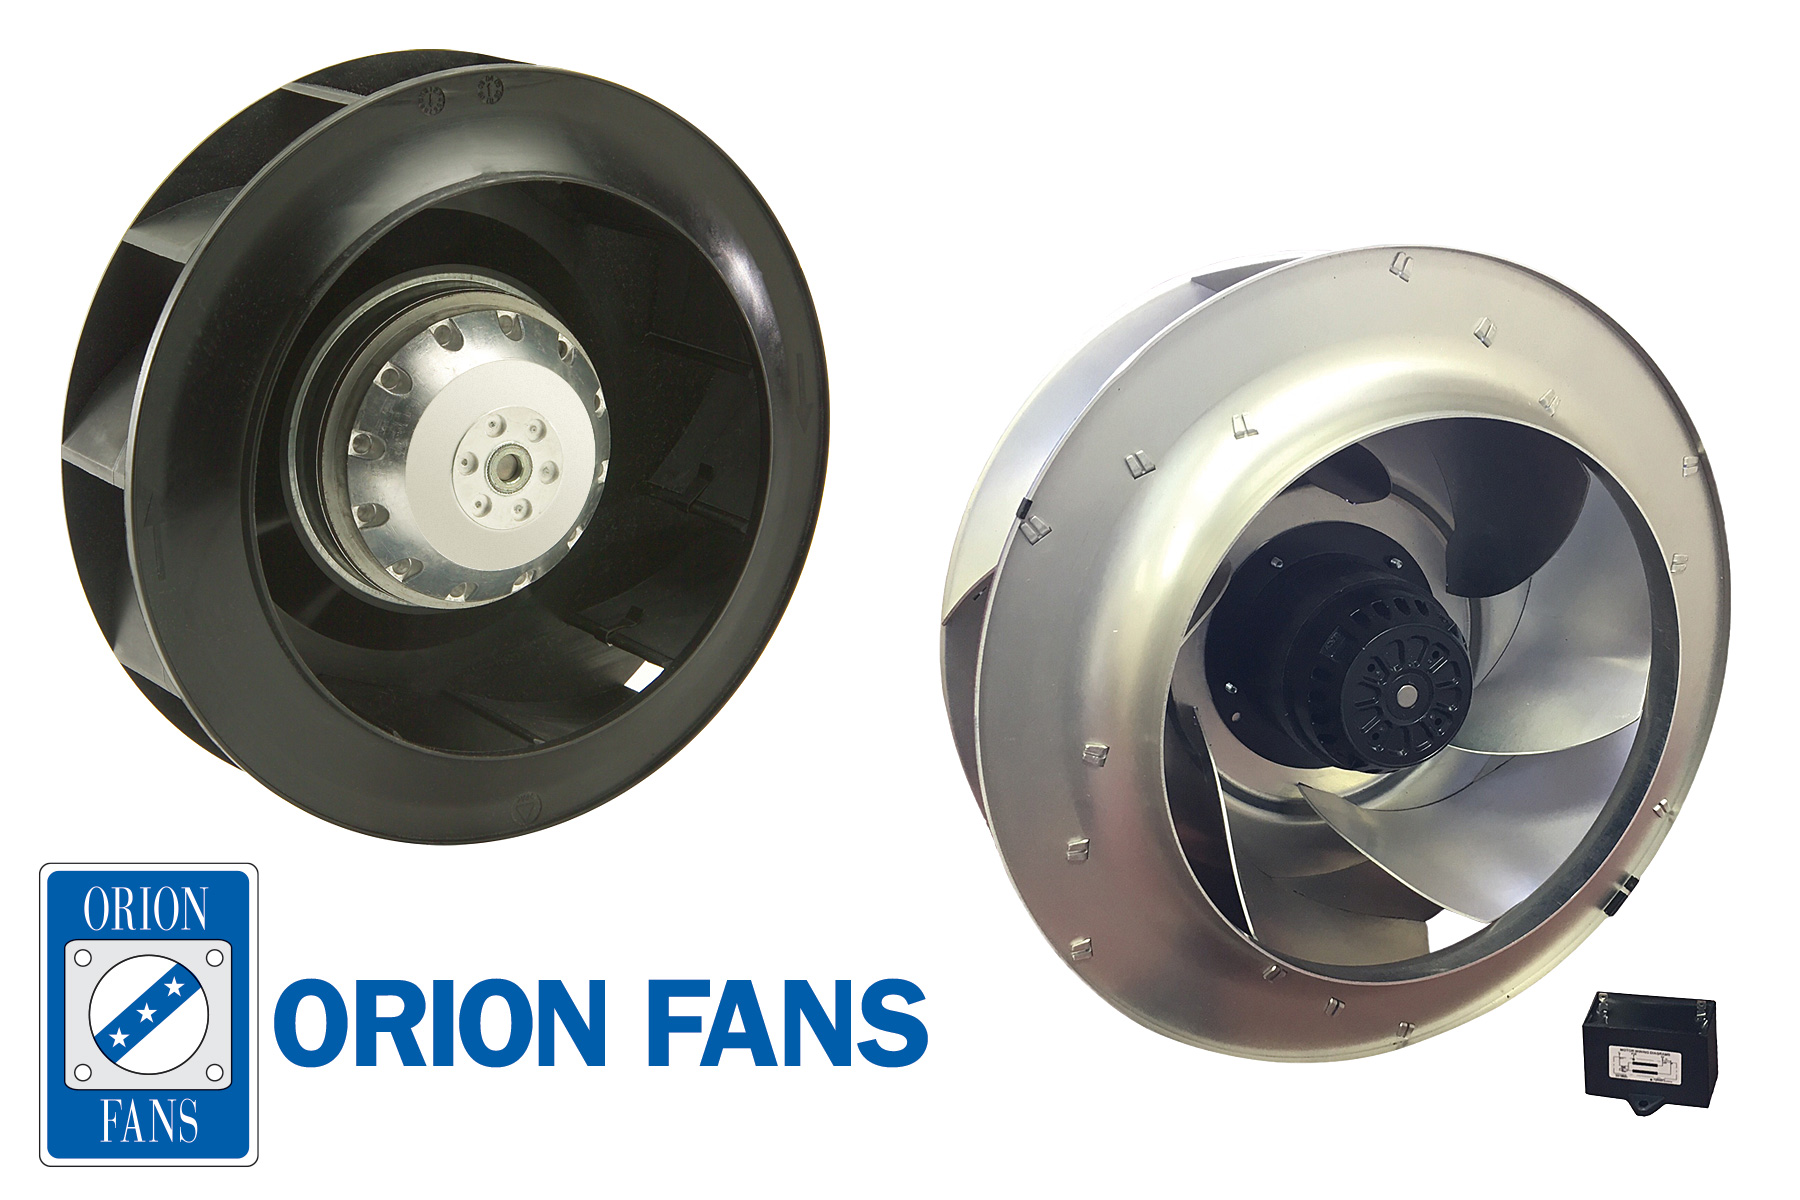 Orion Fans Expands AC Motorized Impellers Family & Adds New DC Motorized Impeller Line